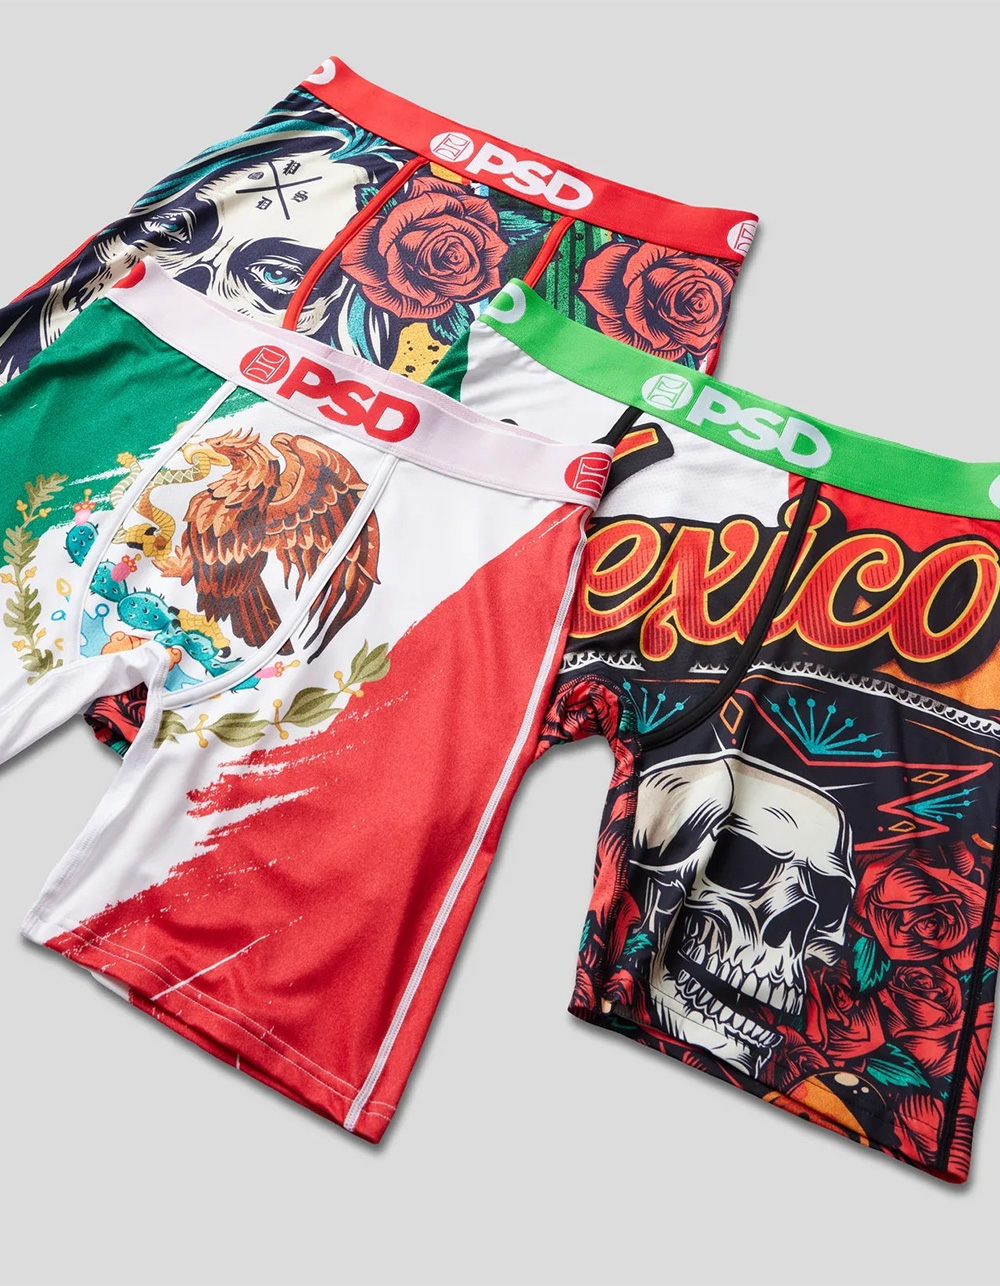 PSD Playboy Boxer Brief  Urban Outfitters Mexico - Clothing, Music, Home &  Accessories